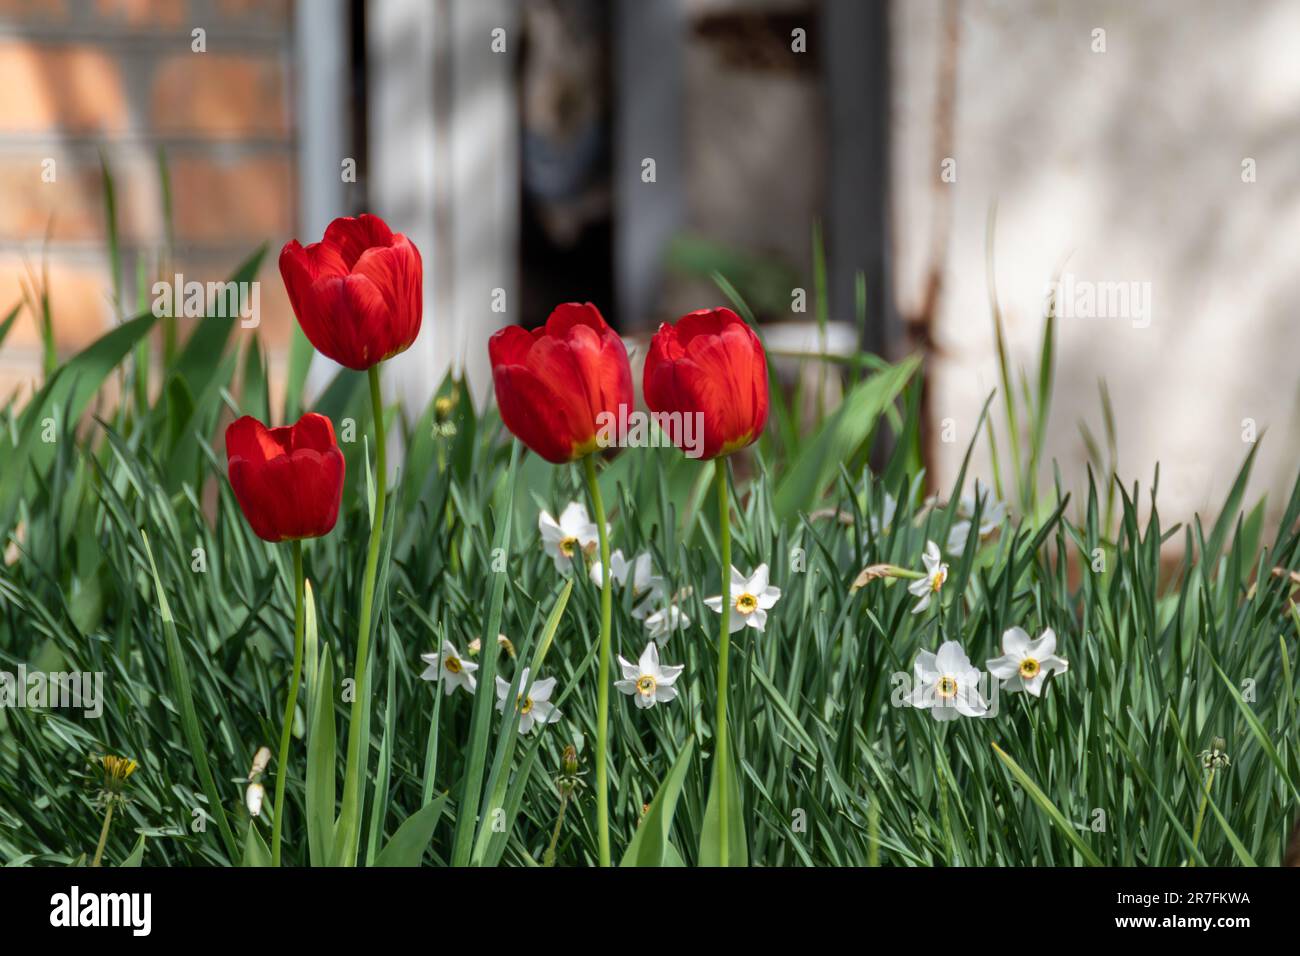 Red tulips with white Narcissus (amaryllis family, Amaryllidaceae) in garden greenery, spring bloom with blurred background. Botany foliage with selec Stock Photo